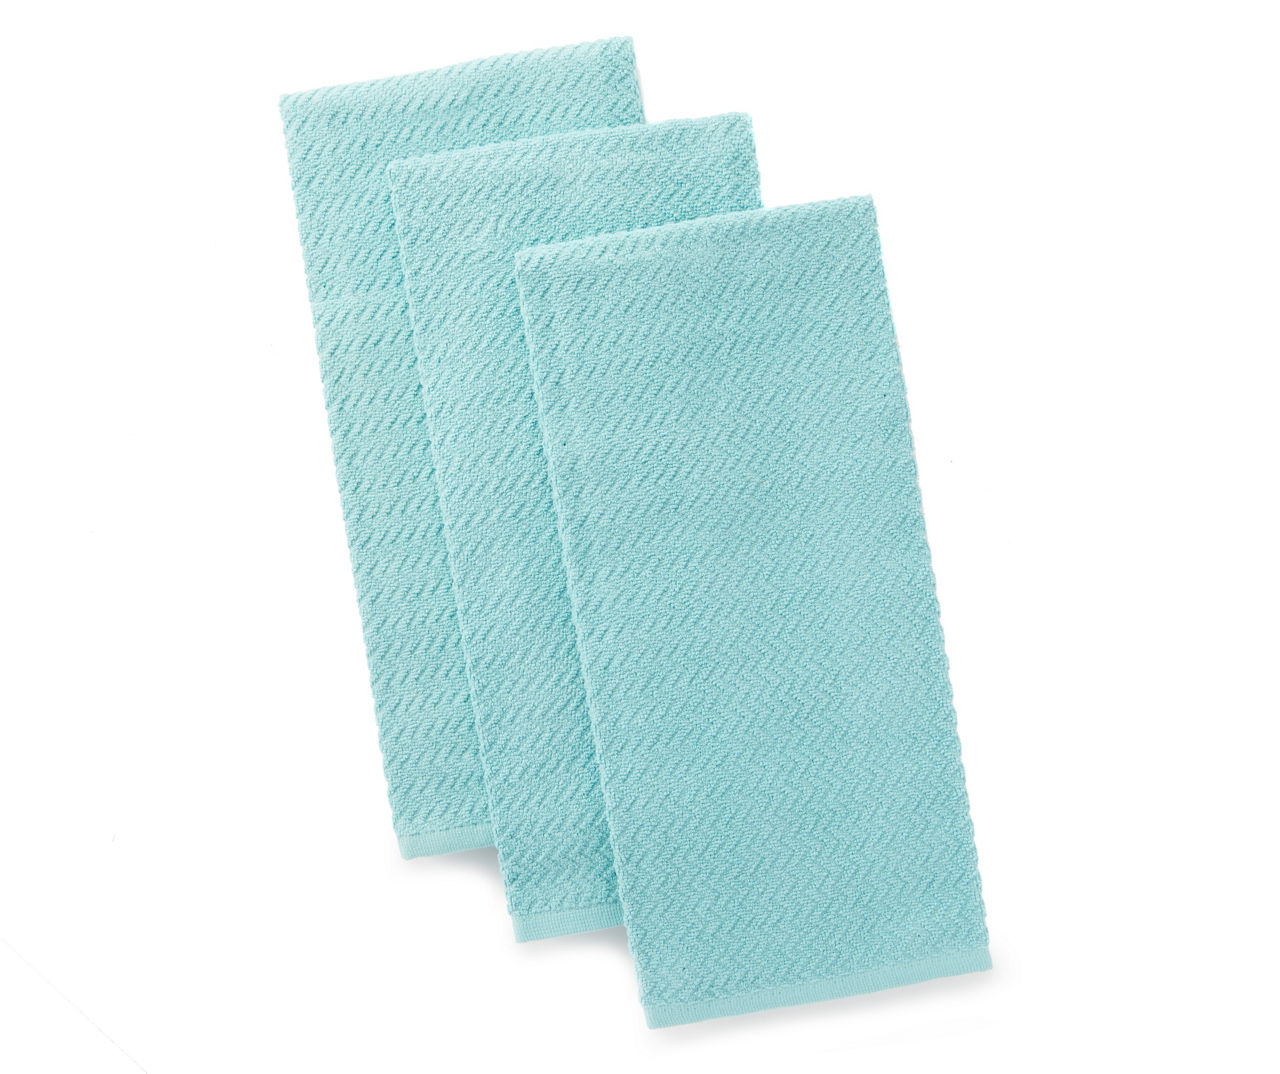 Sterilite Stack & Carry 2 Layer Handle Box Teal Sachet Case of 4